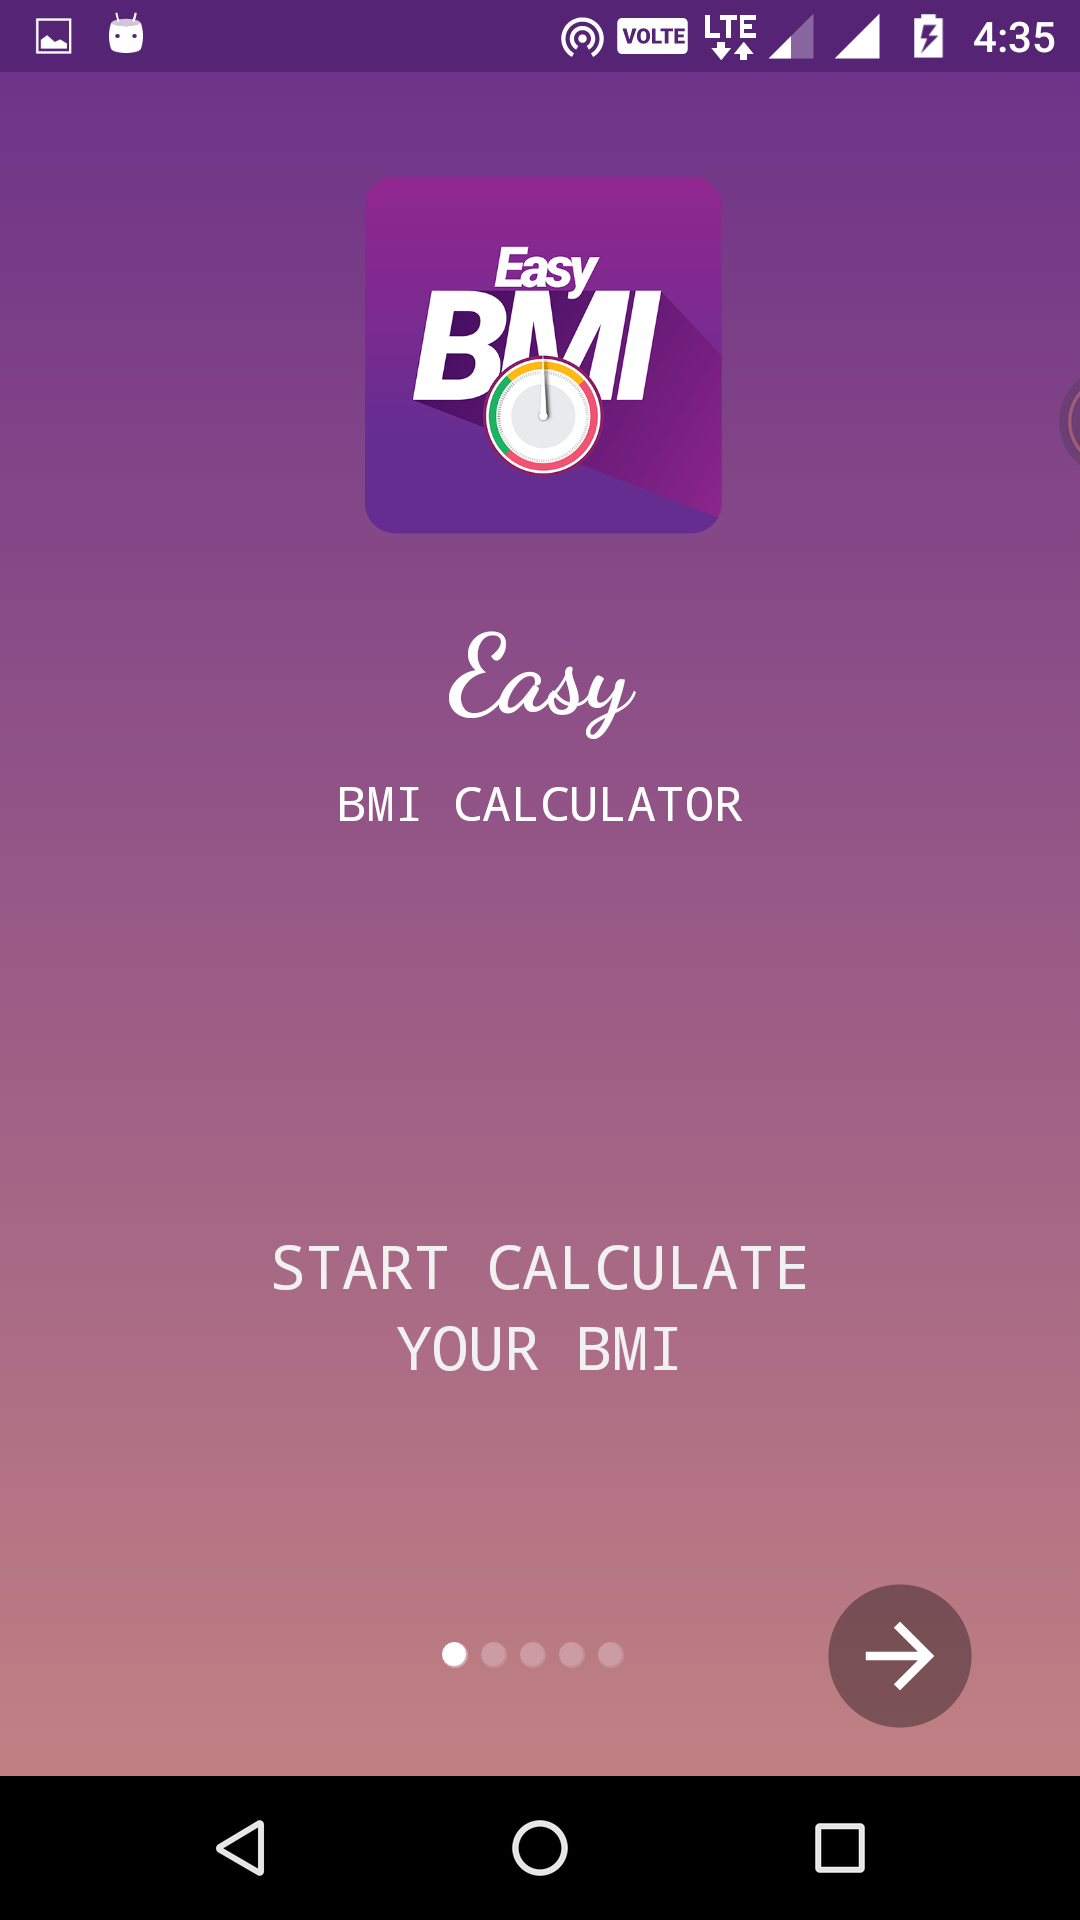 Easy BMI Calculator | Android Studio Mobile Application by 0effortthemes